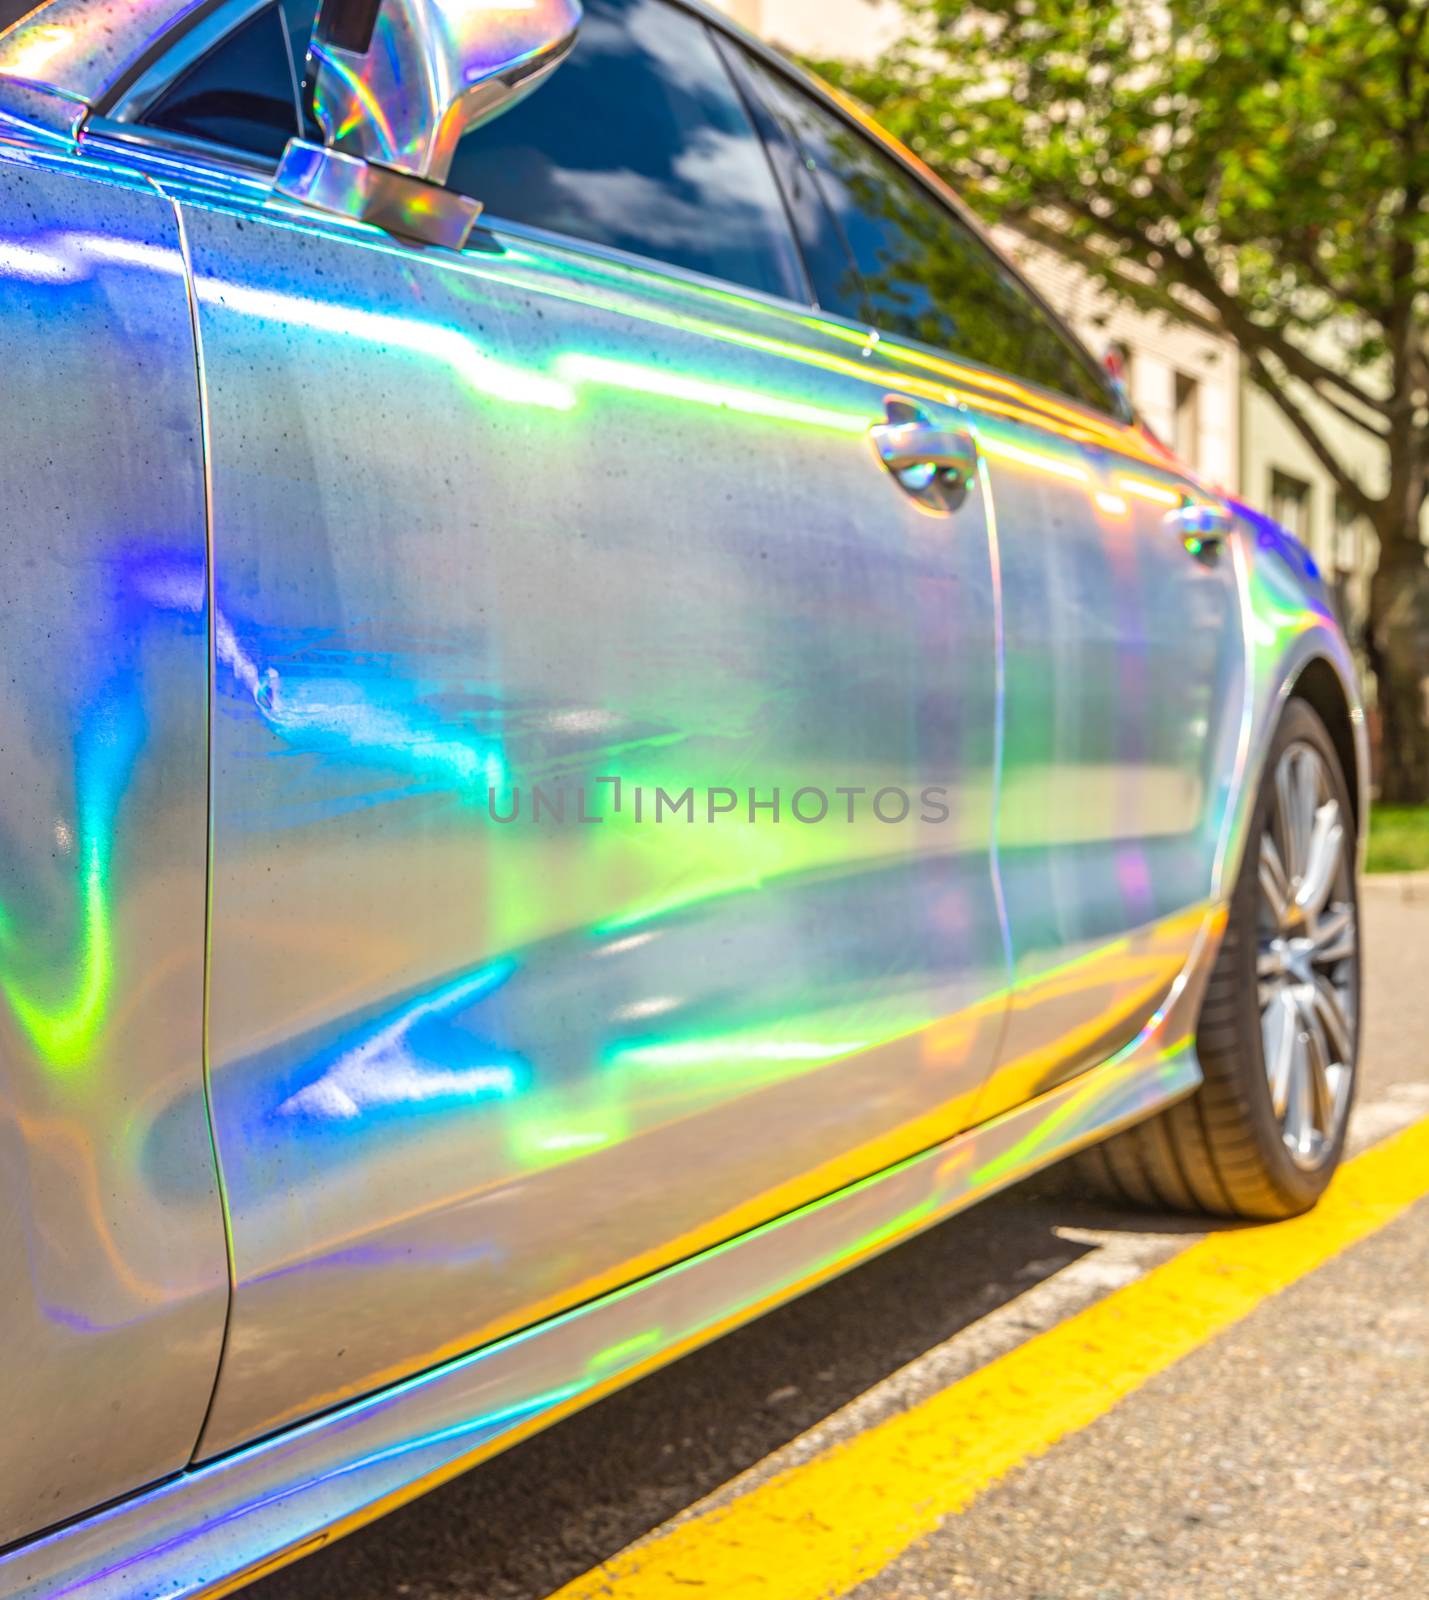 the mirrored car reflects the surrounding colors by Edophoto